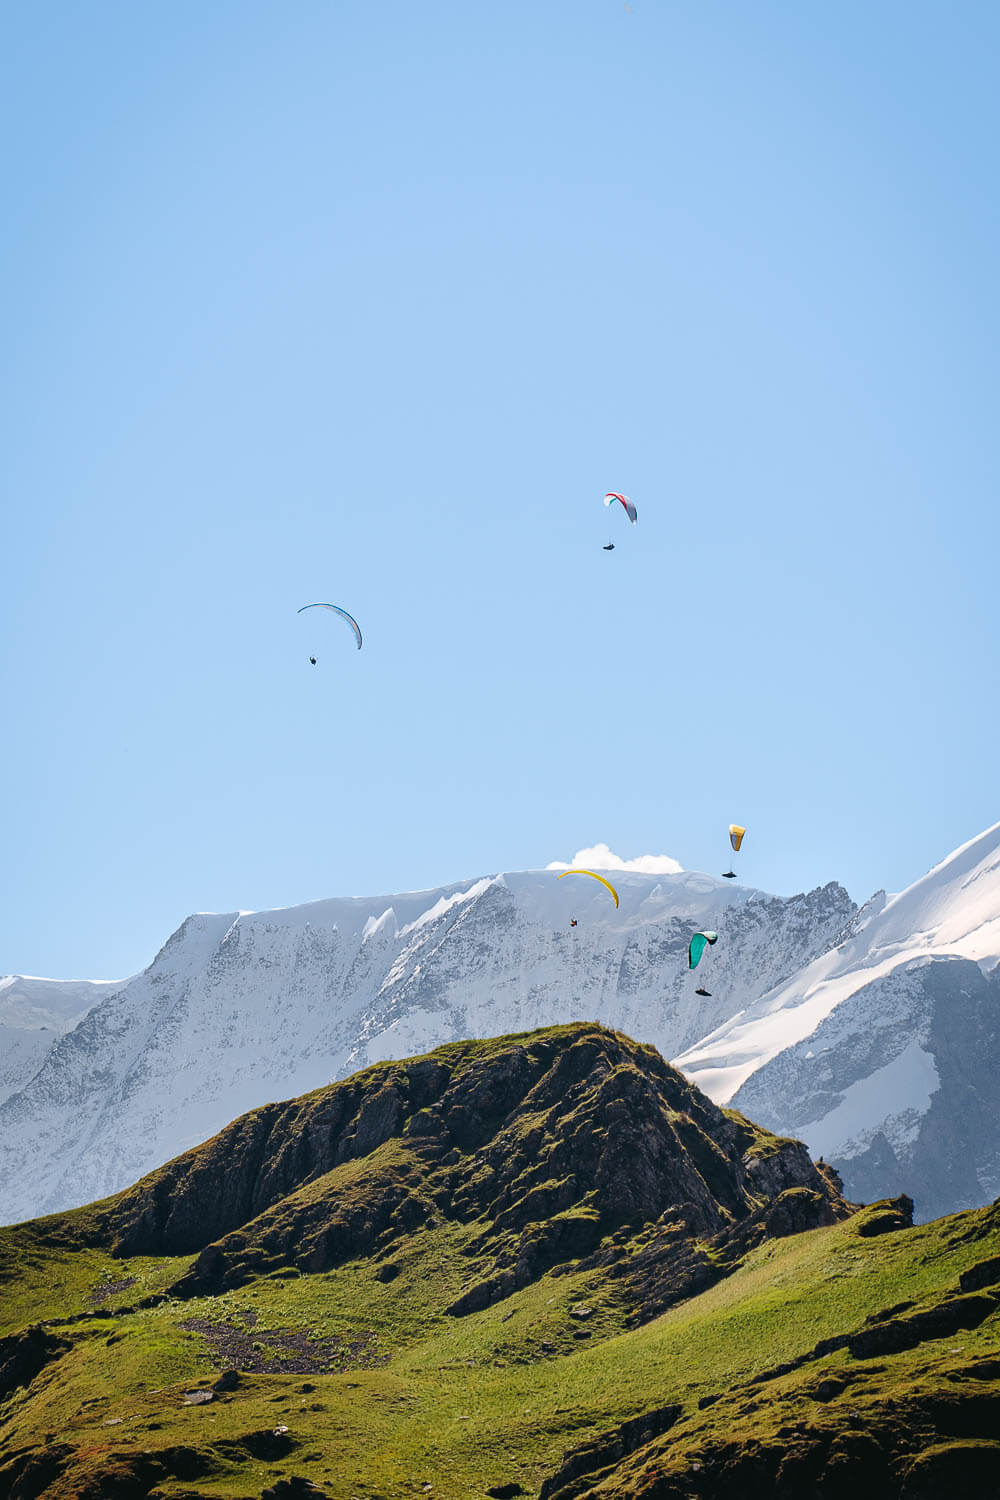 Paragliders over the Bachalpsee